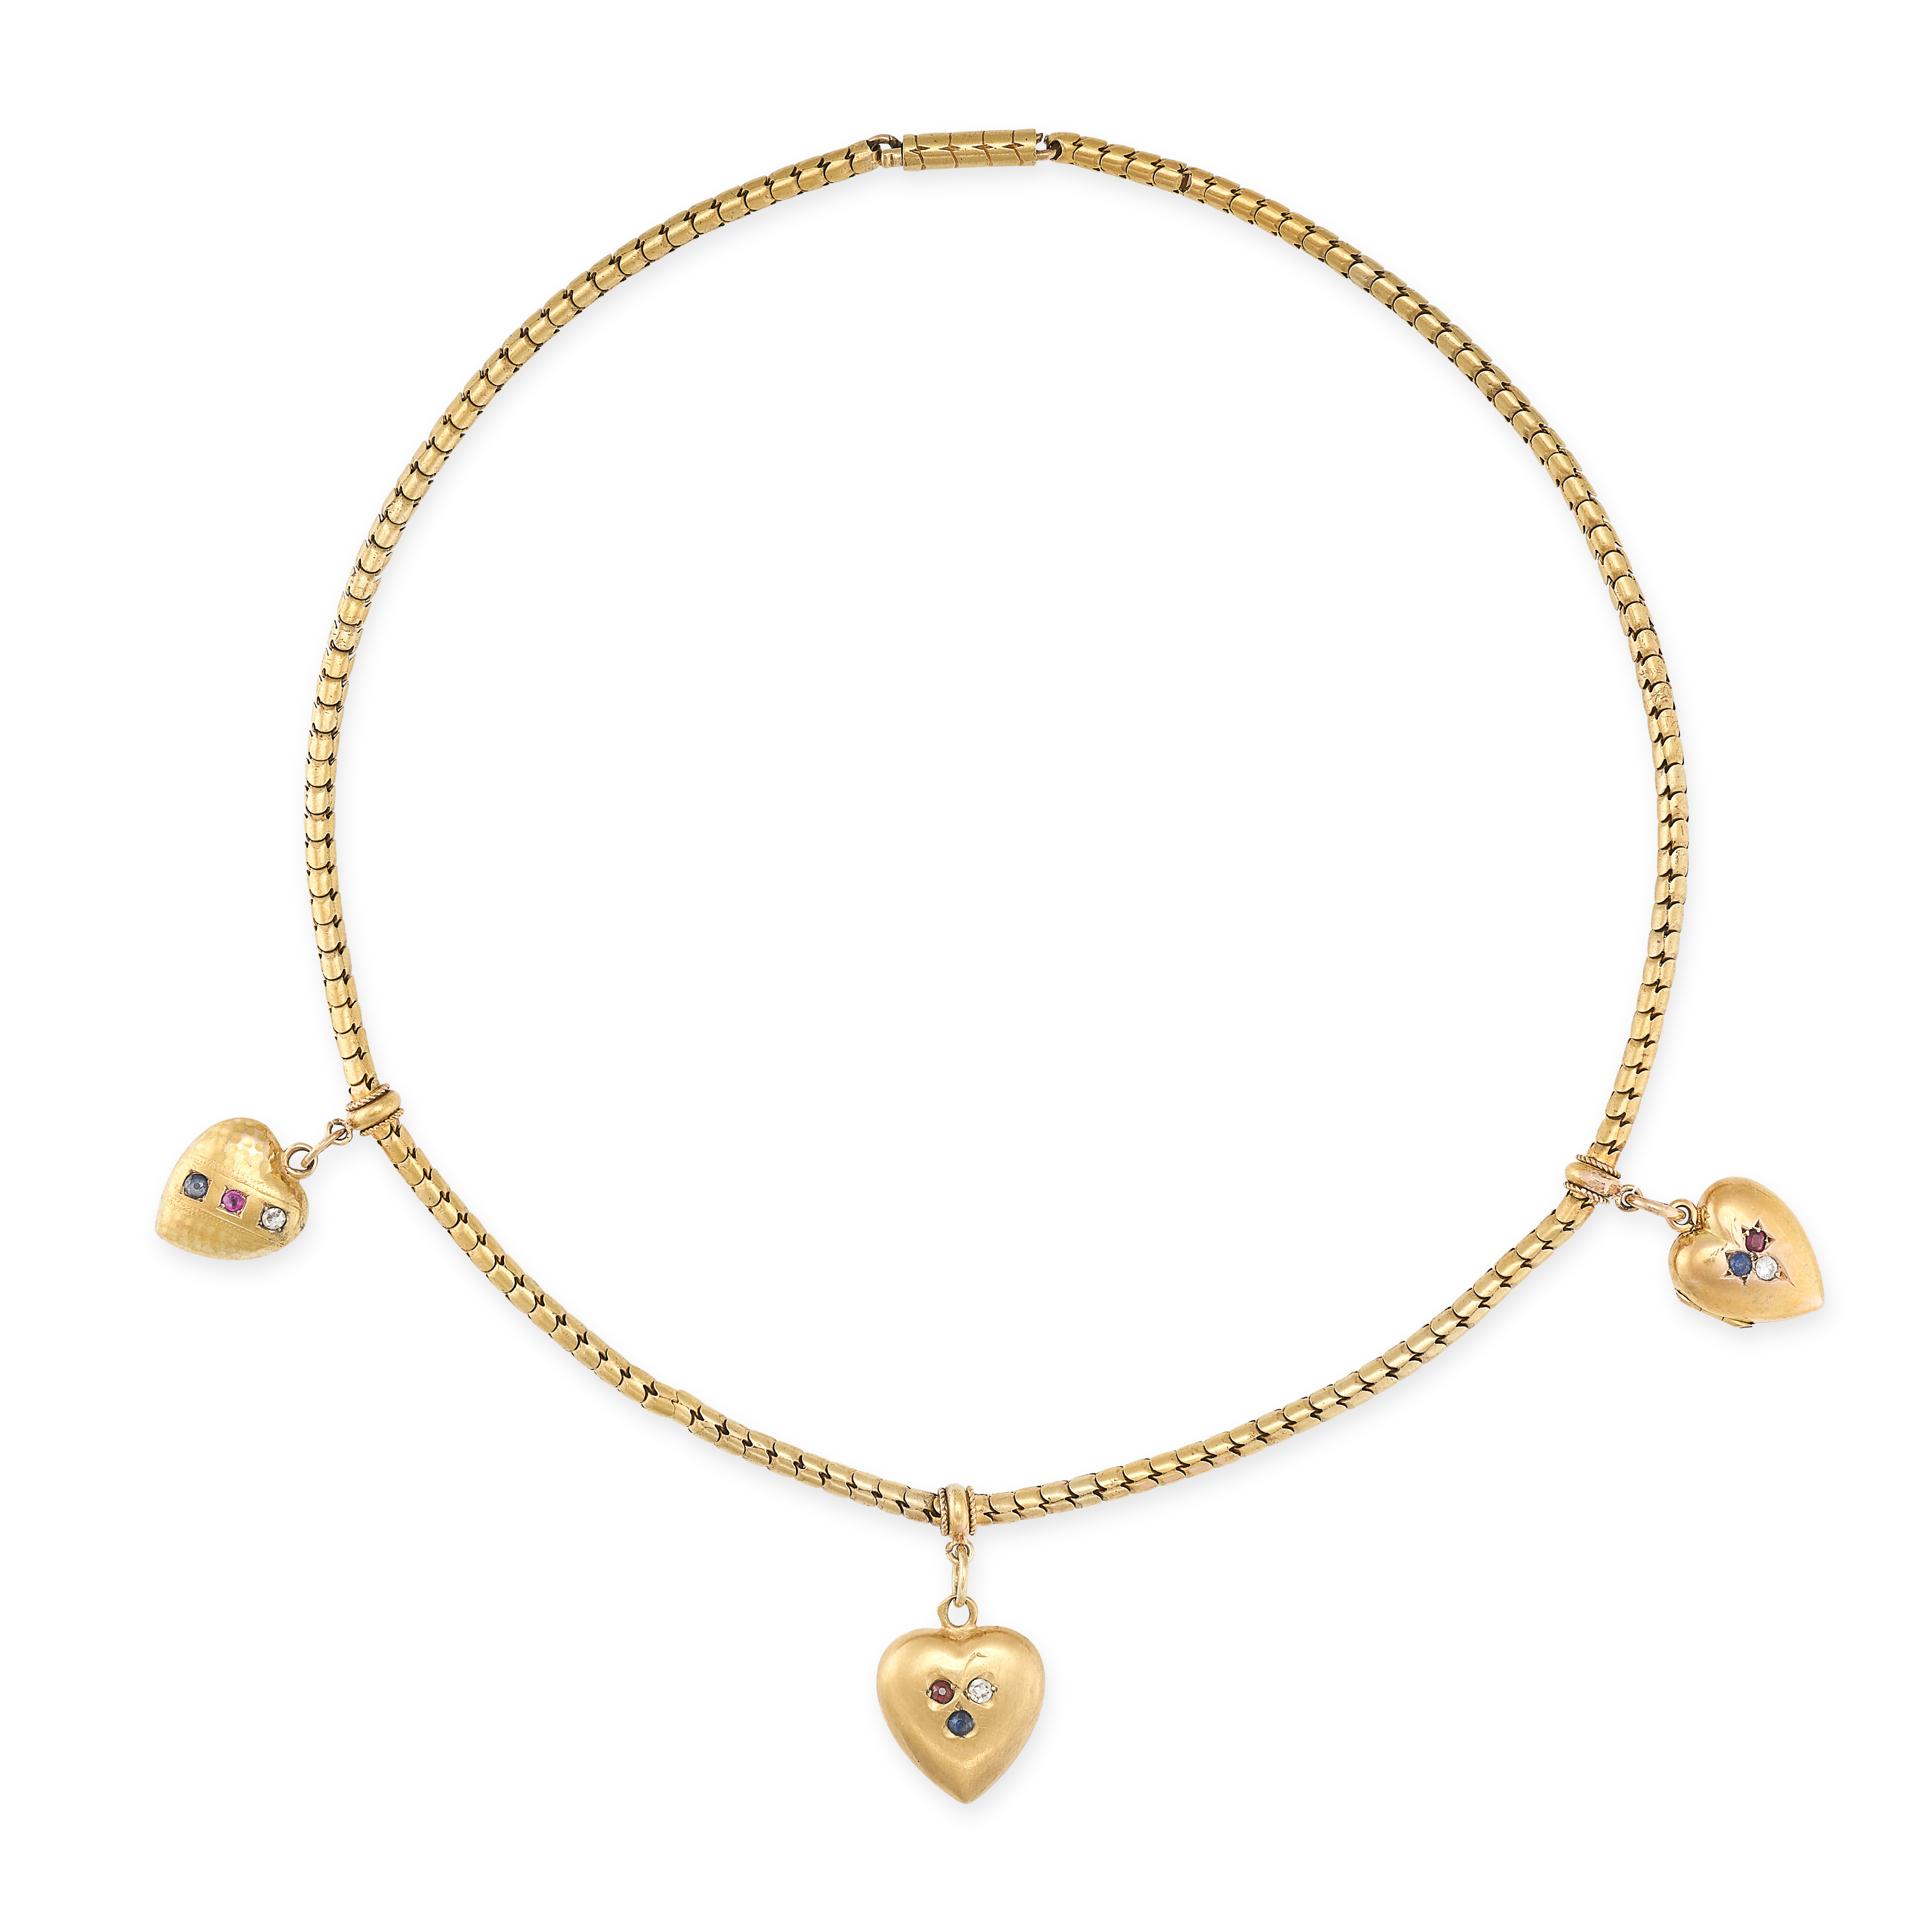 AN ANTIQUE HEART PENDANT / CHARM NECKLACE in yellow gold, comprising a snake link chain with three